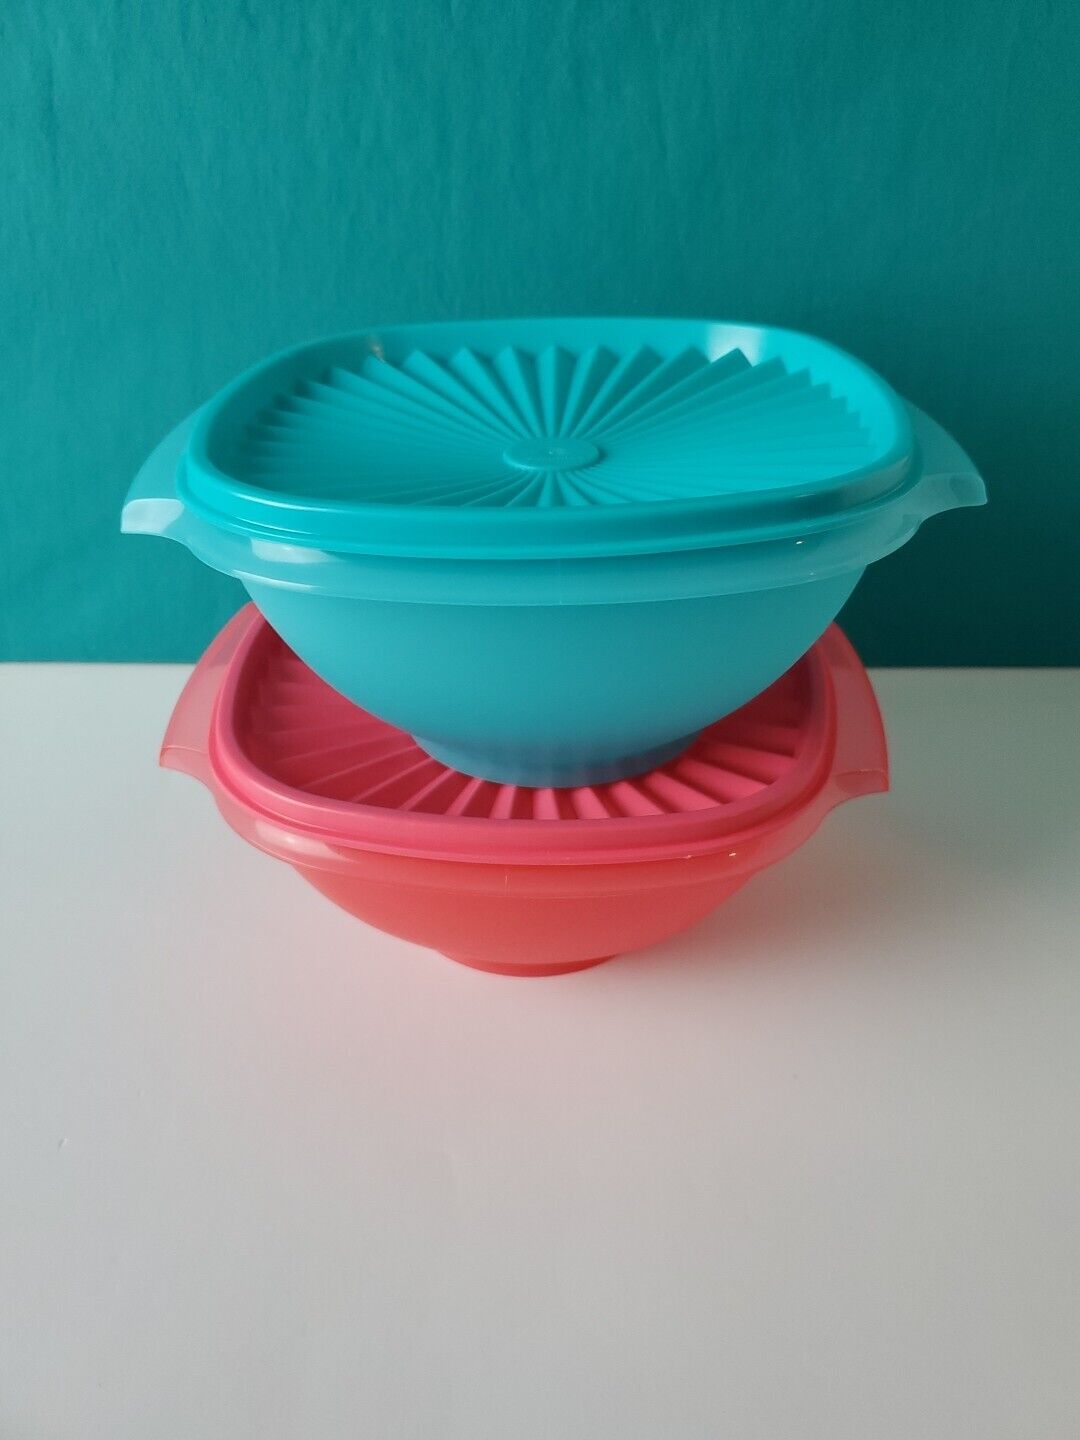 Tupperware Servalier Bowl 5.25 Cups Classic Dragonfly Pink And Teal Set Of 2